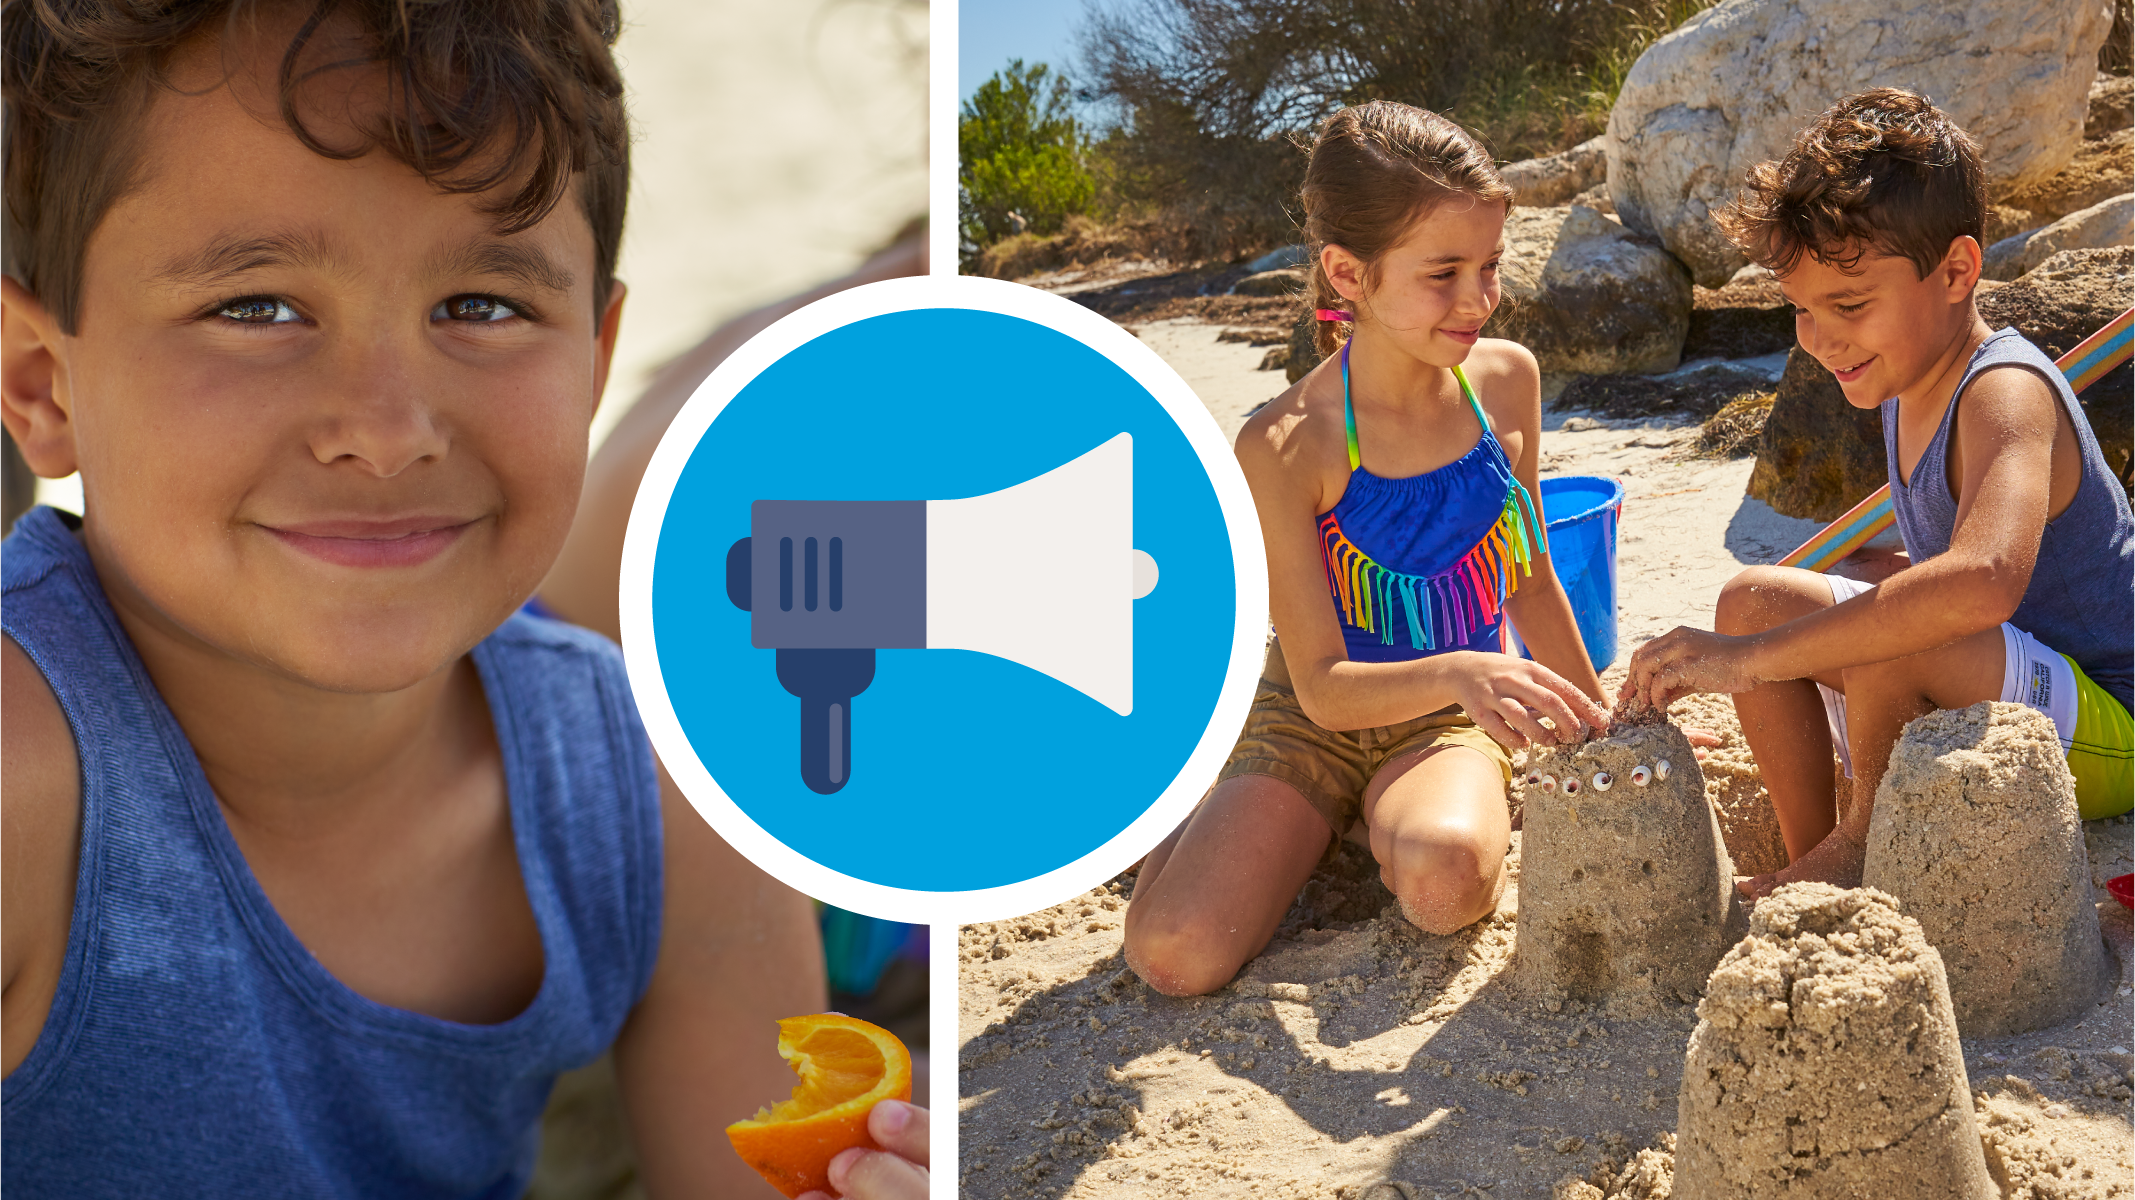 Two photographs with a megaphone icon separating them. The image on the left contains a smiling child on the beach, the image on the right contains two children building sandcastles. 